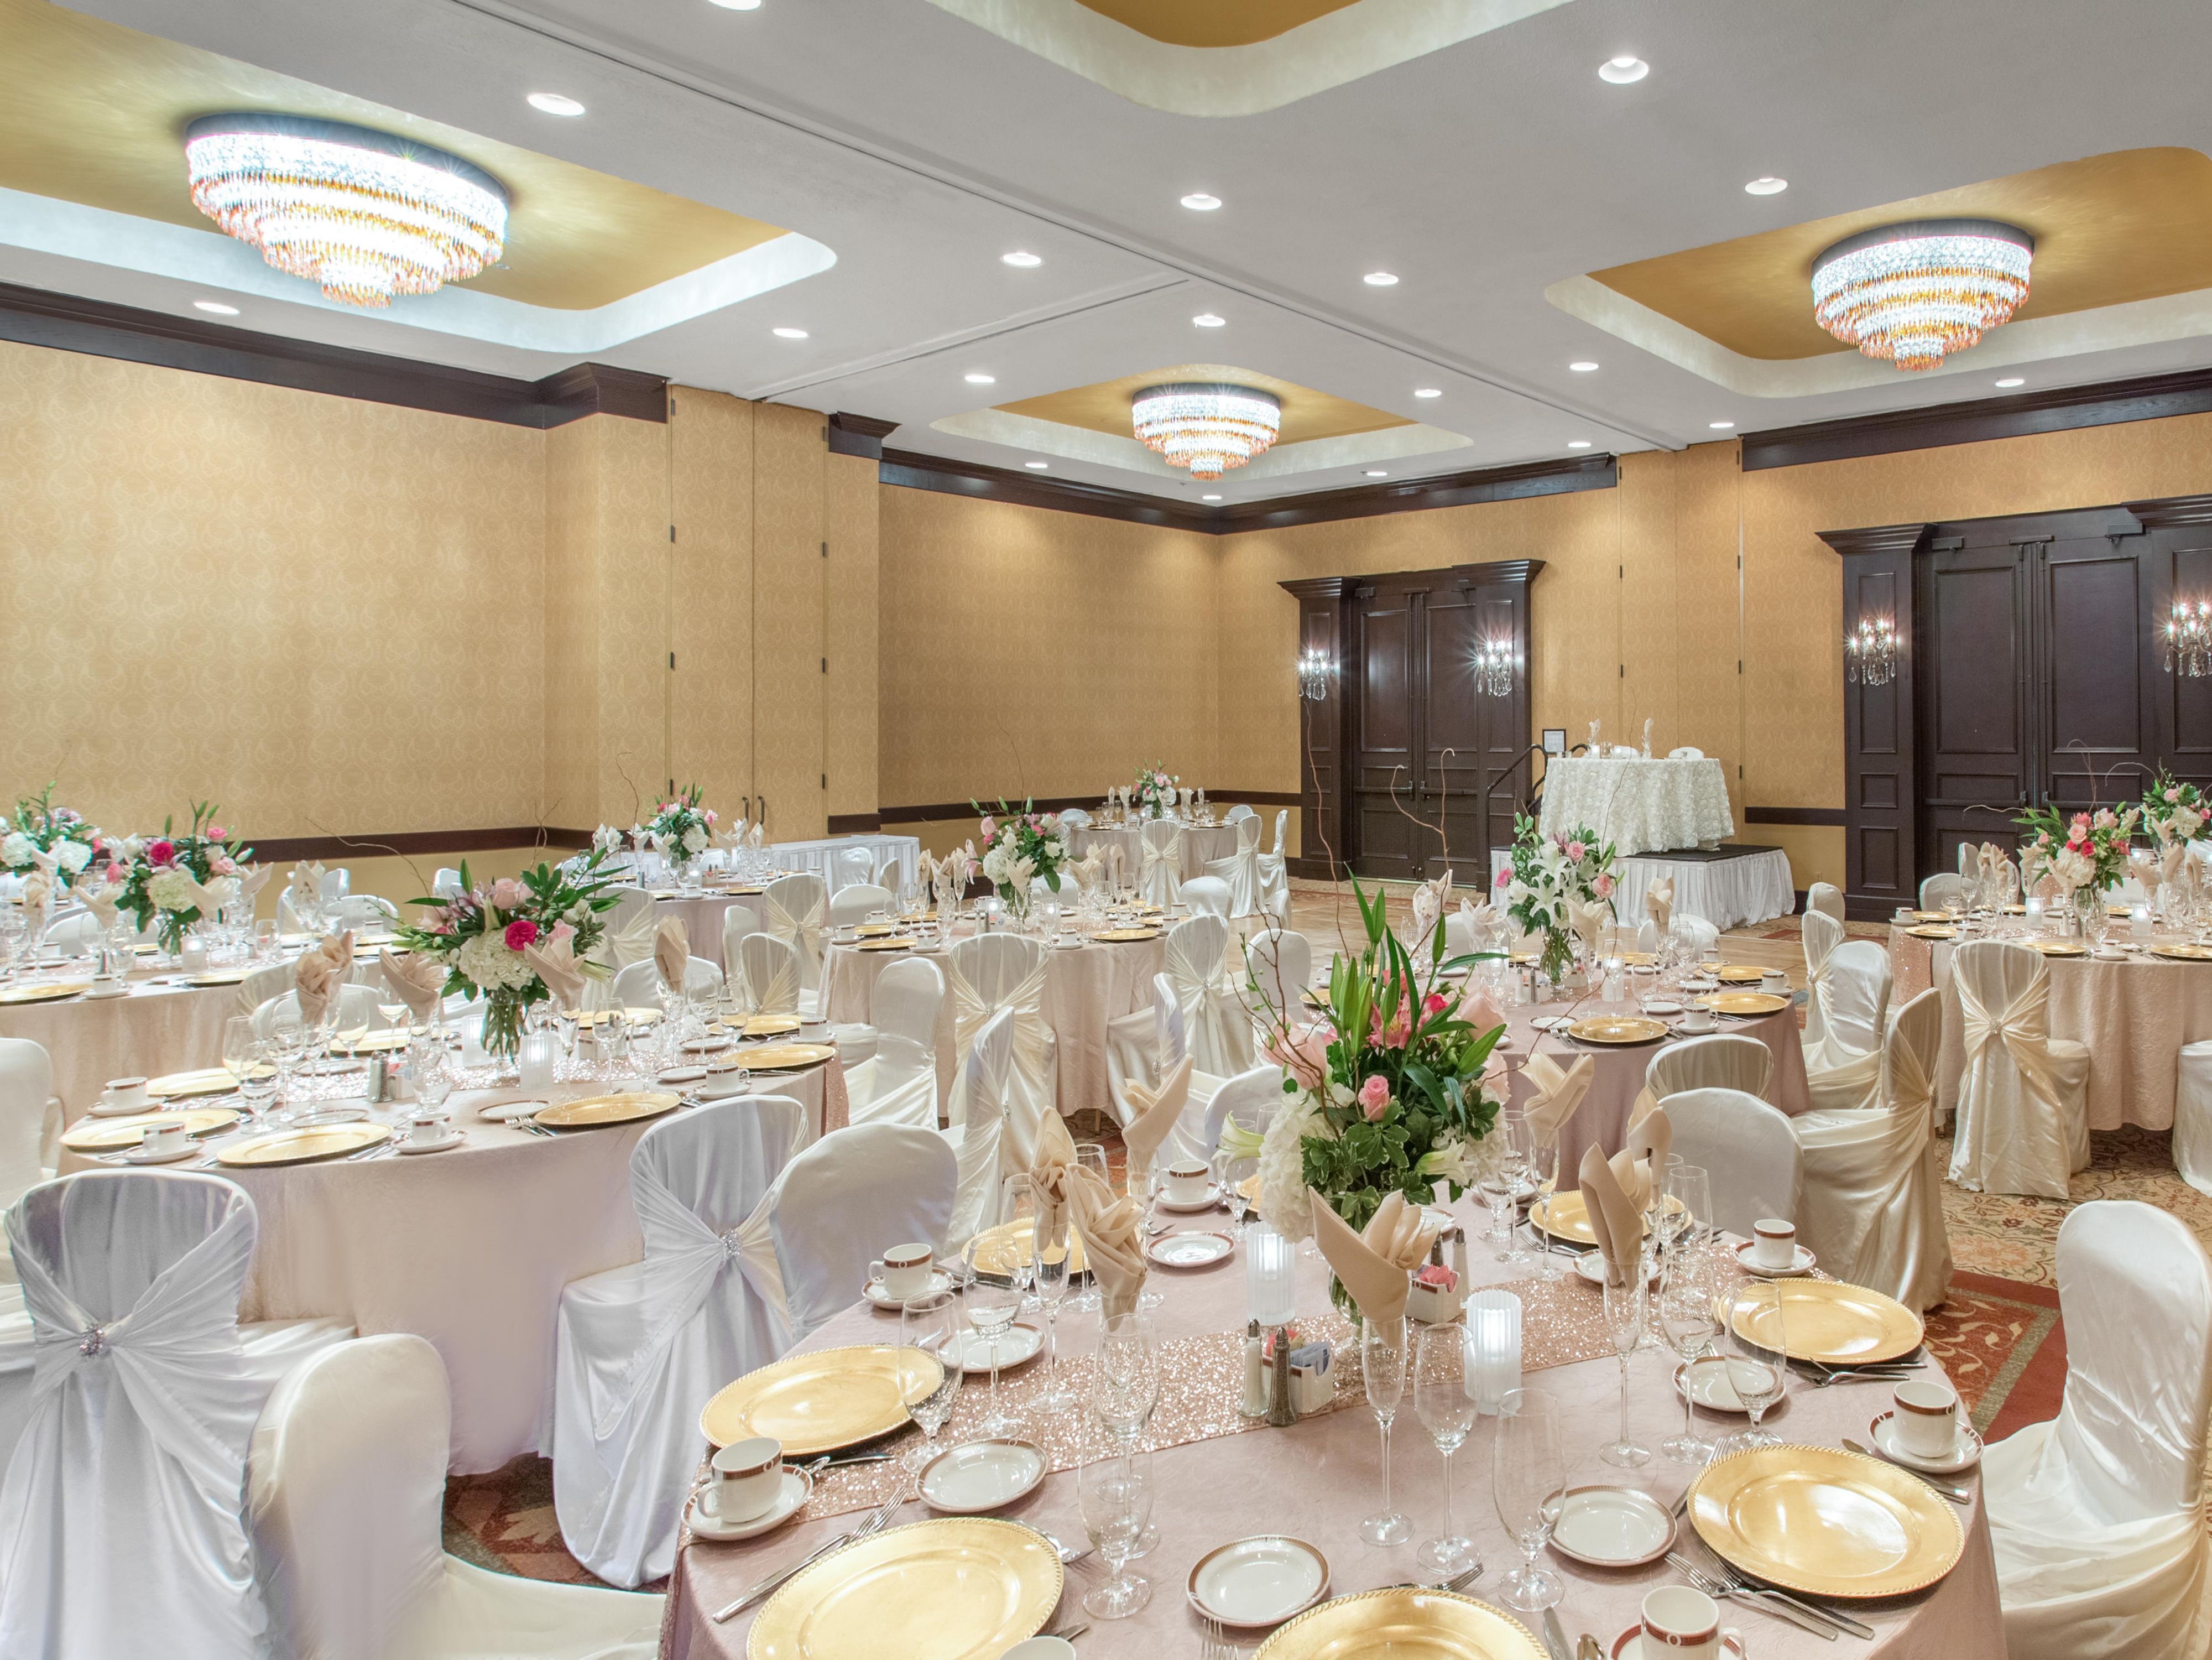 In Albuquerque, be the wedding hostess with the mostest as you say "I do" at the Crowne Plaza, an IHG Hotel. Wedding guests will feast on both good food and good times in our picture-perfect surroundings.